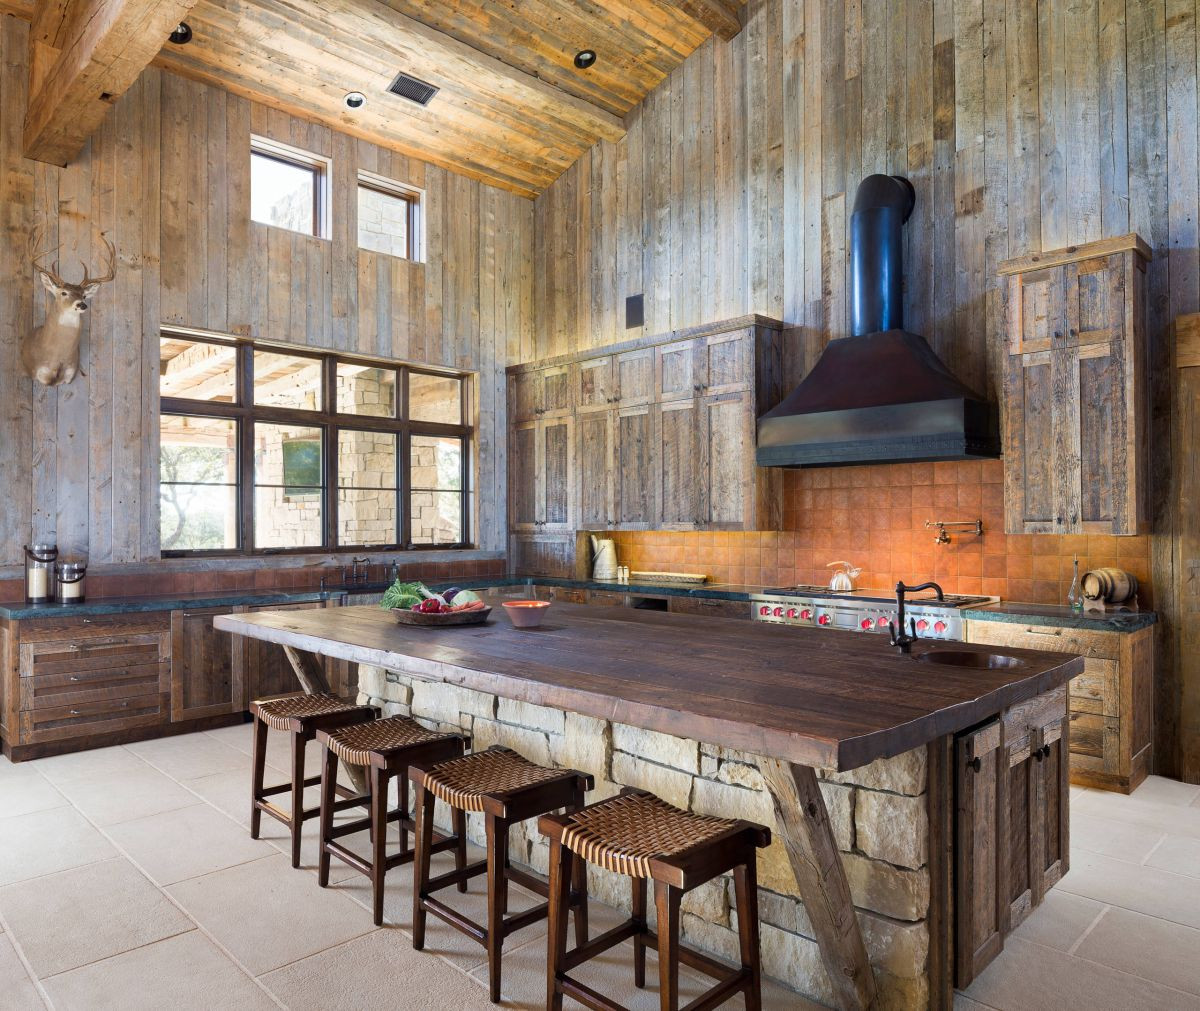 Rustic Wood Kitchen Island
 15 Rustic Kitchen Islands Perfect for Any Kitchen